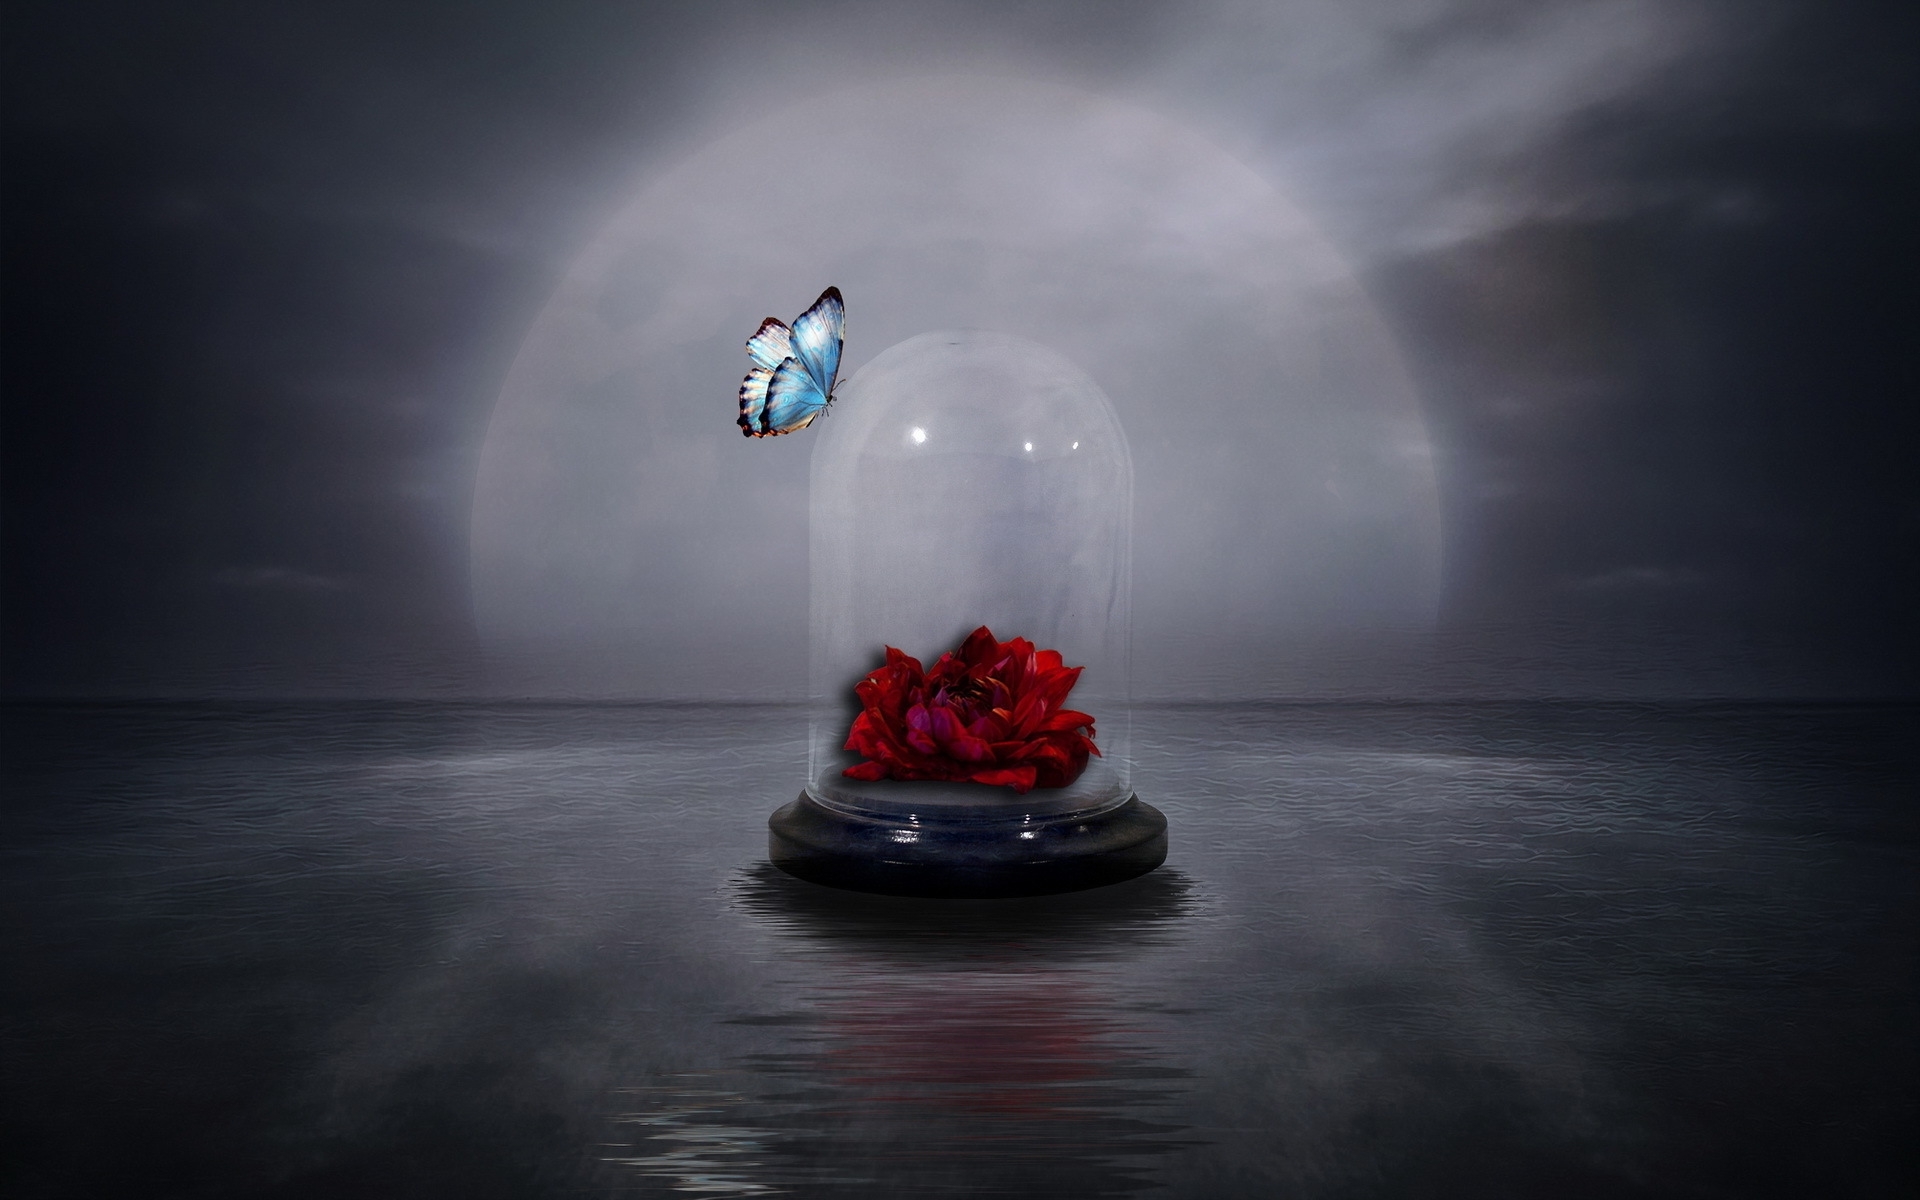 HD desktop wallpaper: Rose, Glass, Butterfly, Jar, Artistic, Red Rose  download free picture #742551